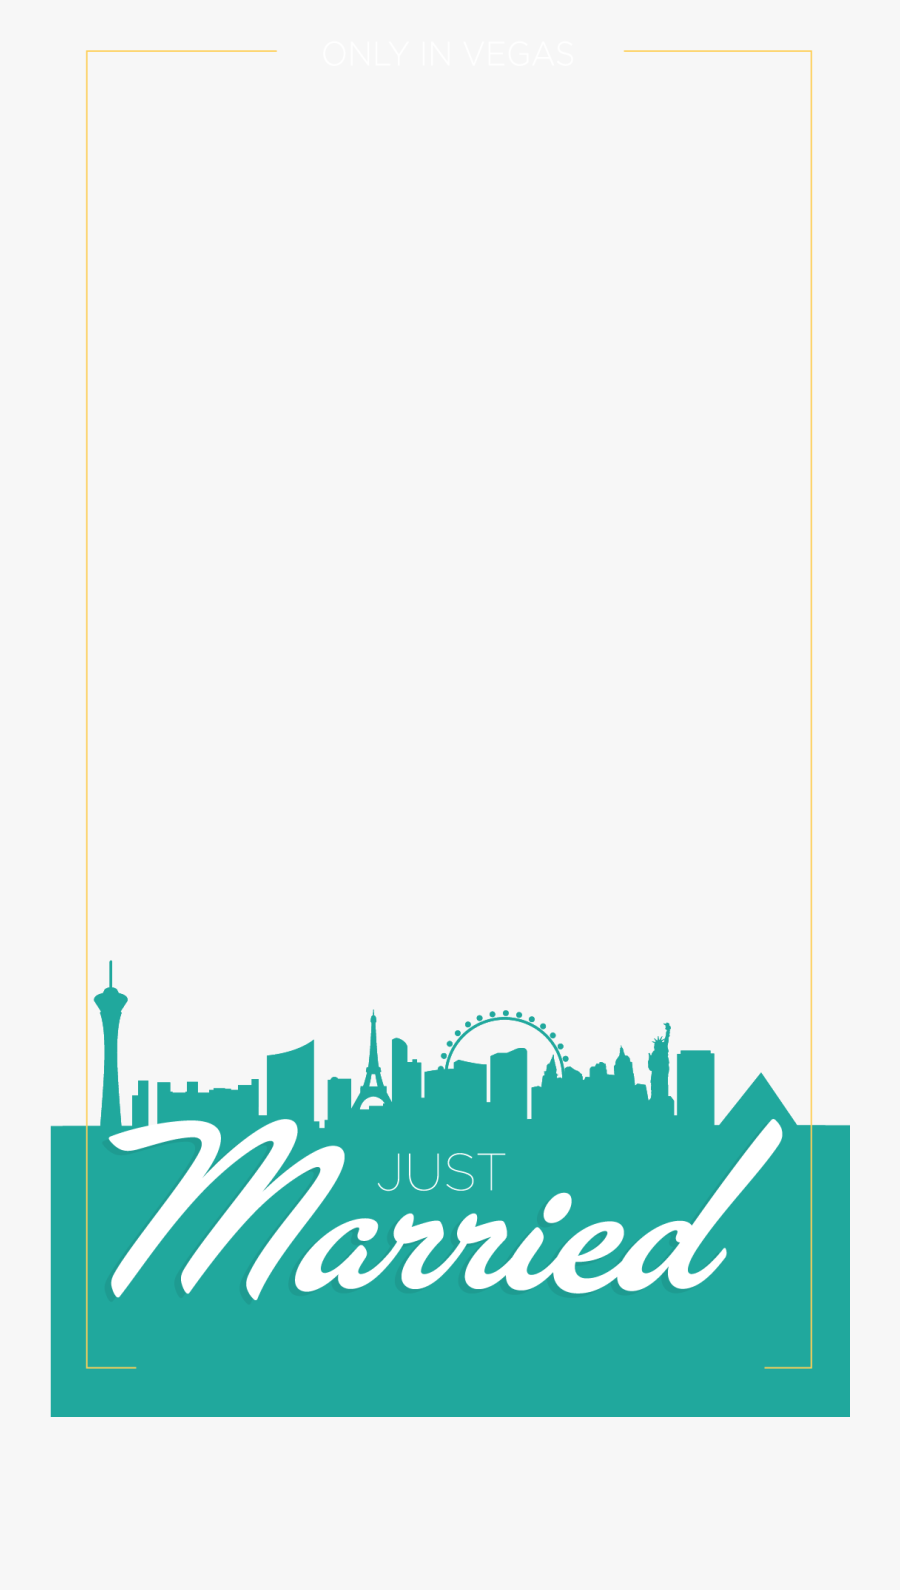 Transparent Just Married Clipart - Sorry We Re Closed Sign, Transparent Clipart